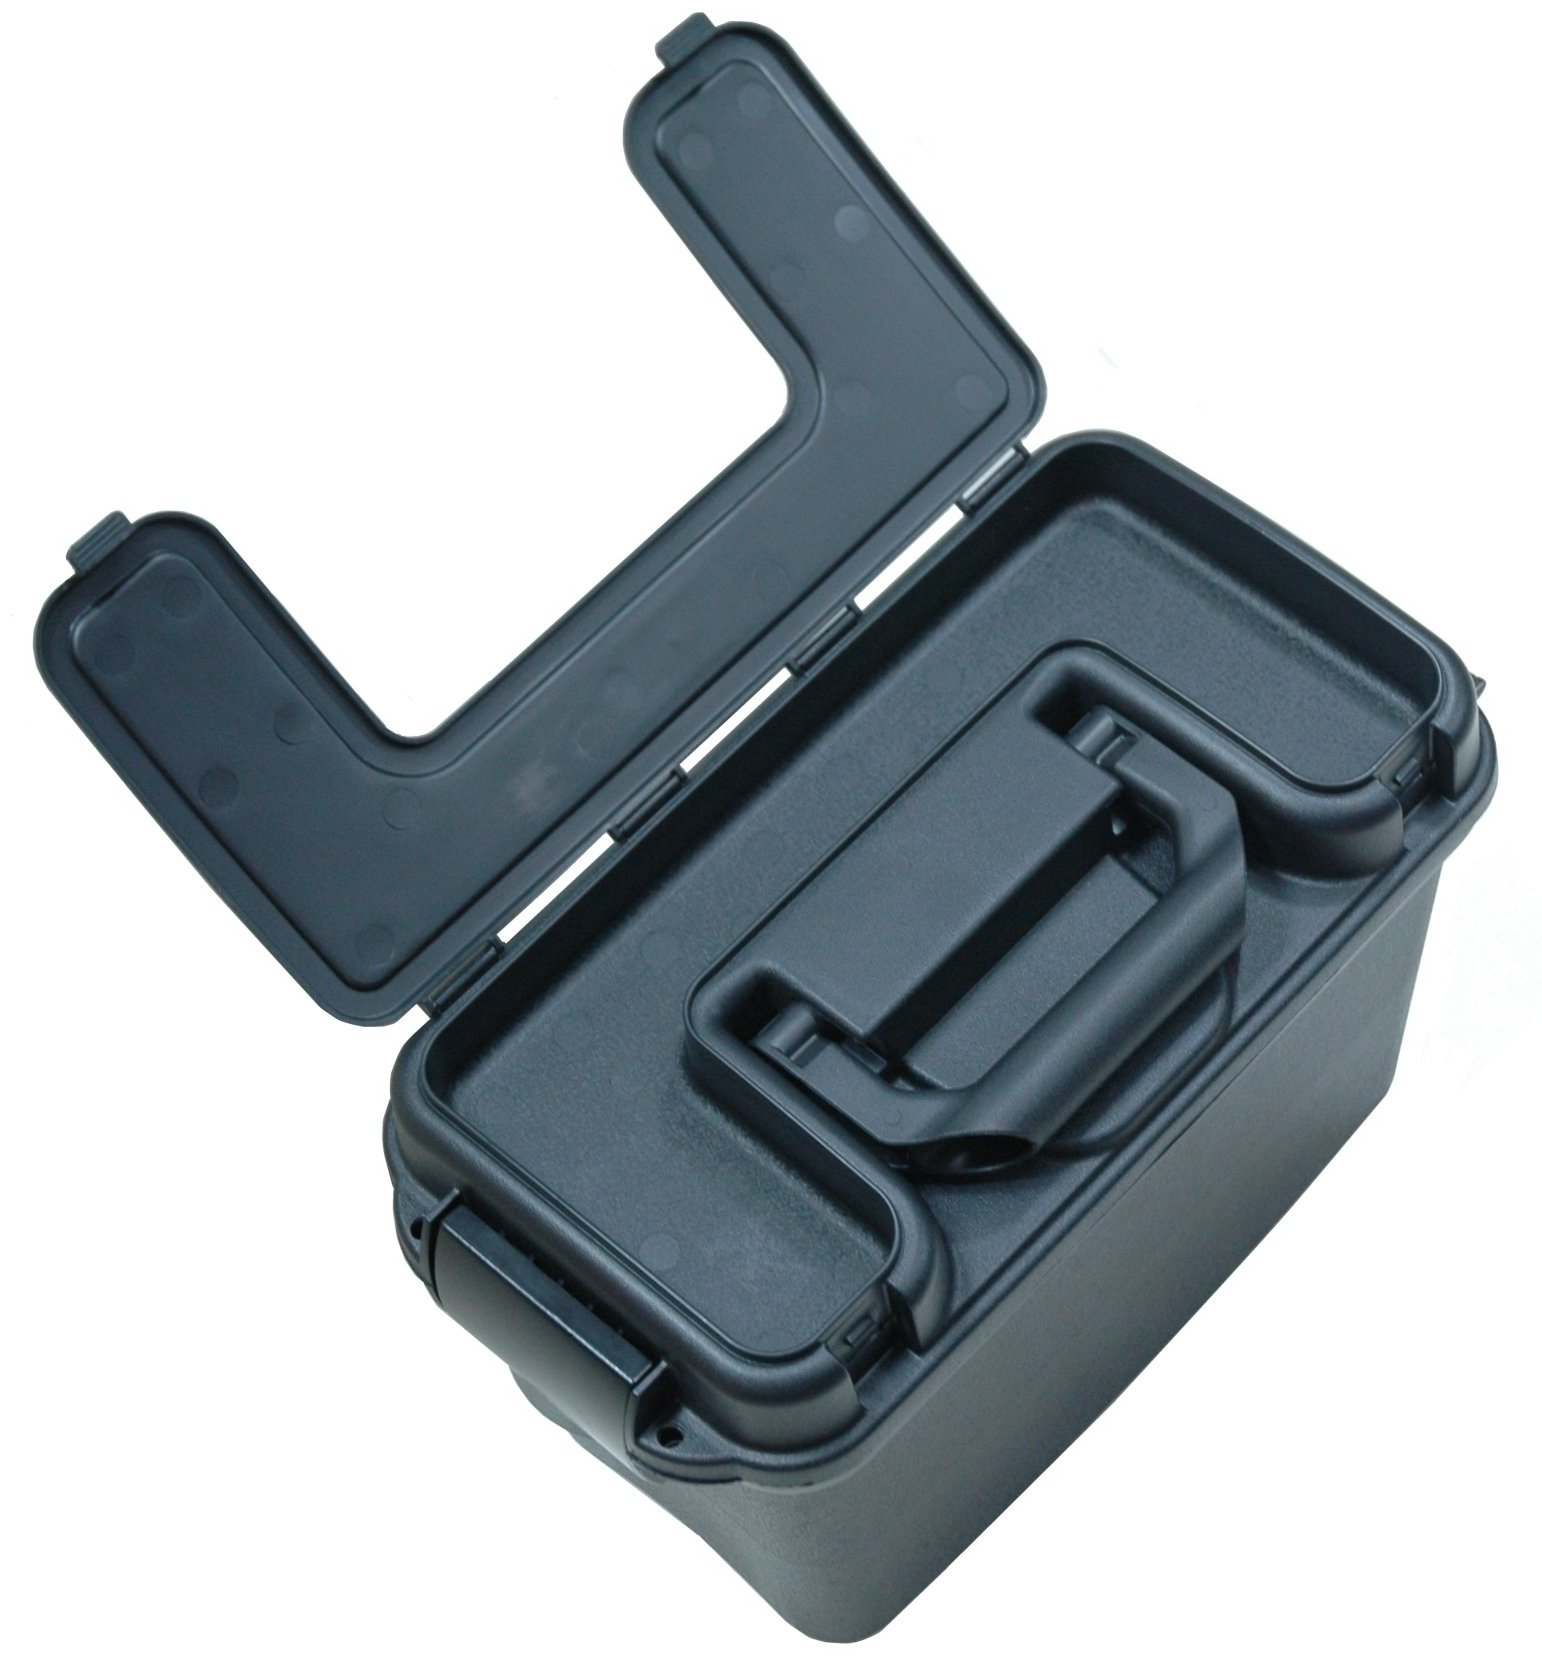 X15 Ar15 Magazine X10 Pistol Water Resistant Box With Accessory Compartment Case Club